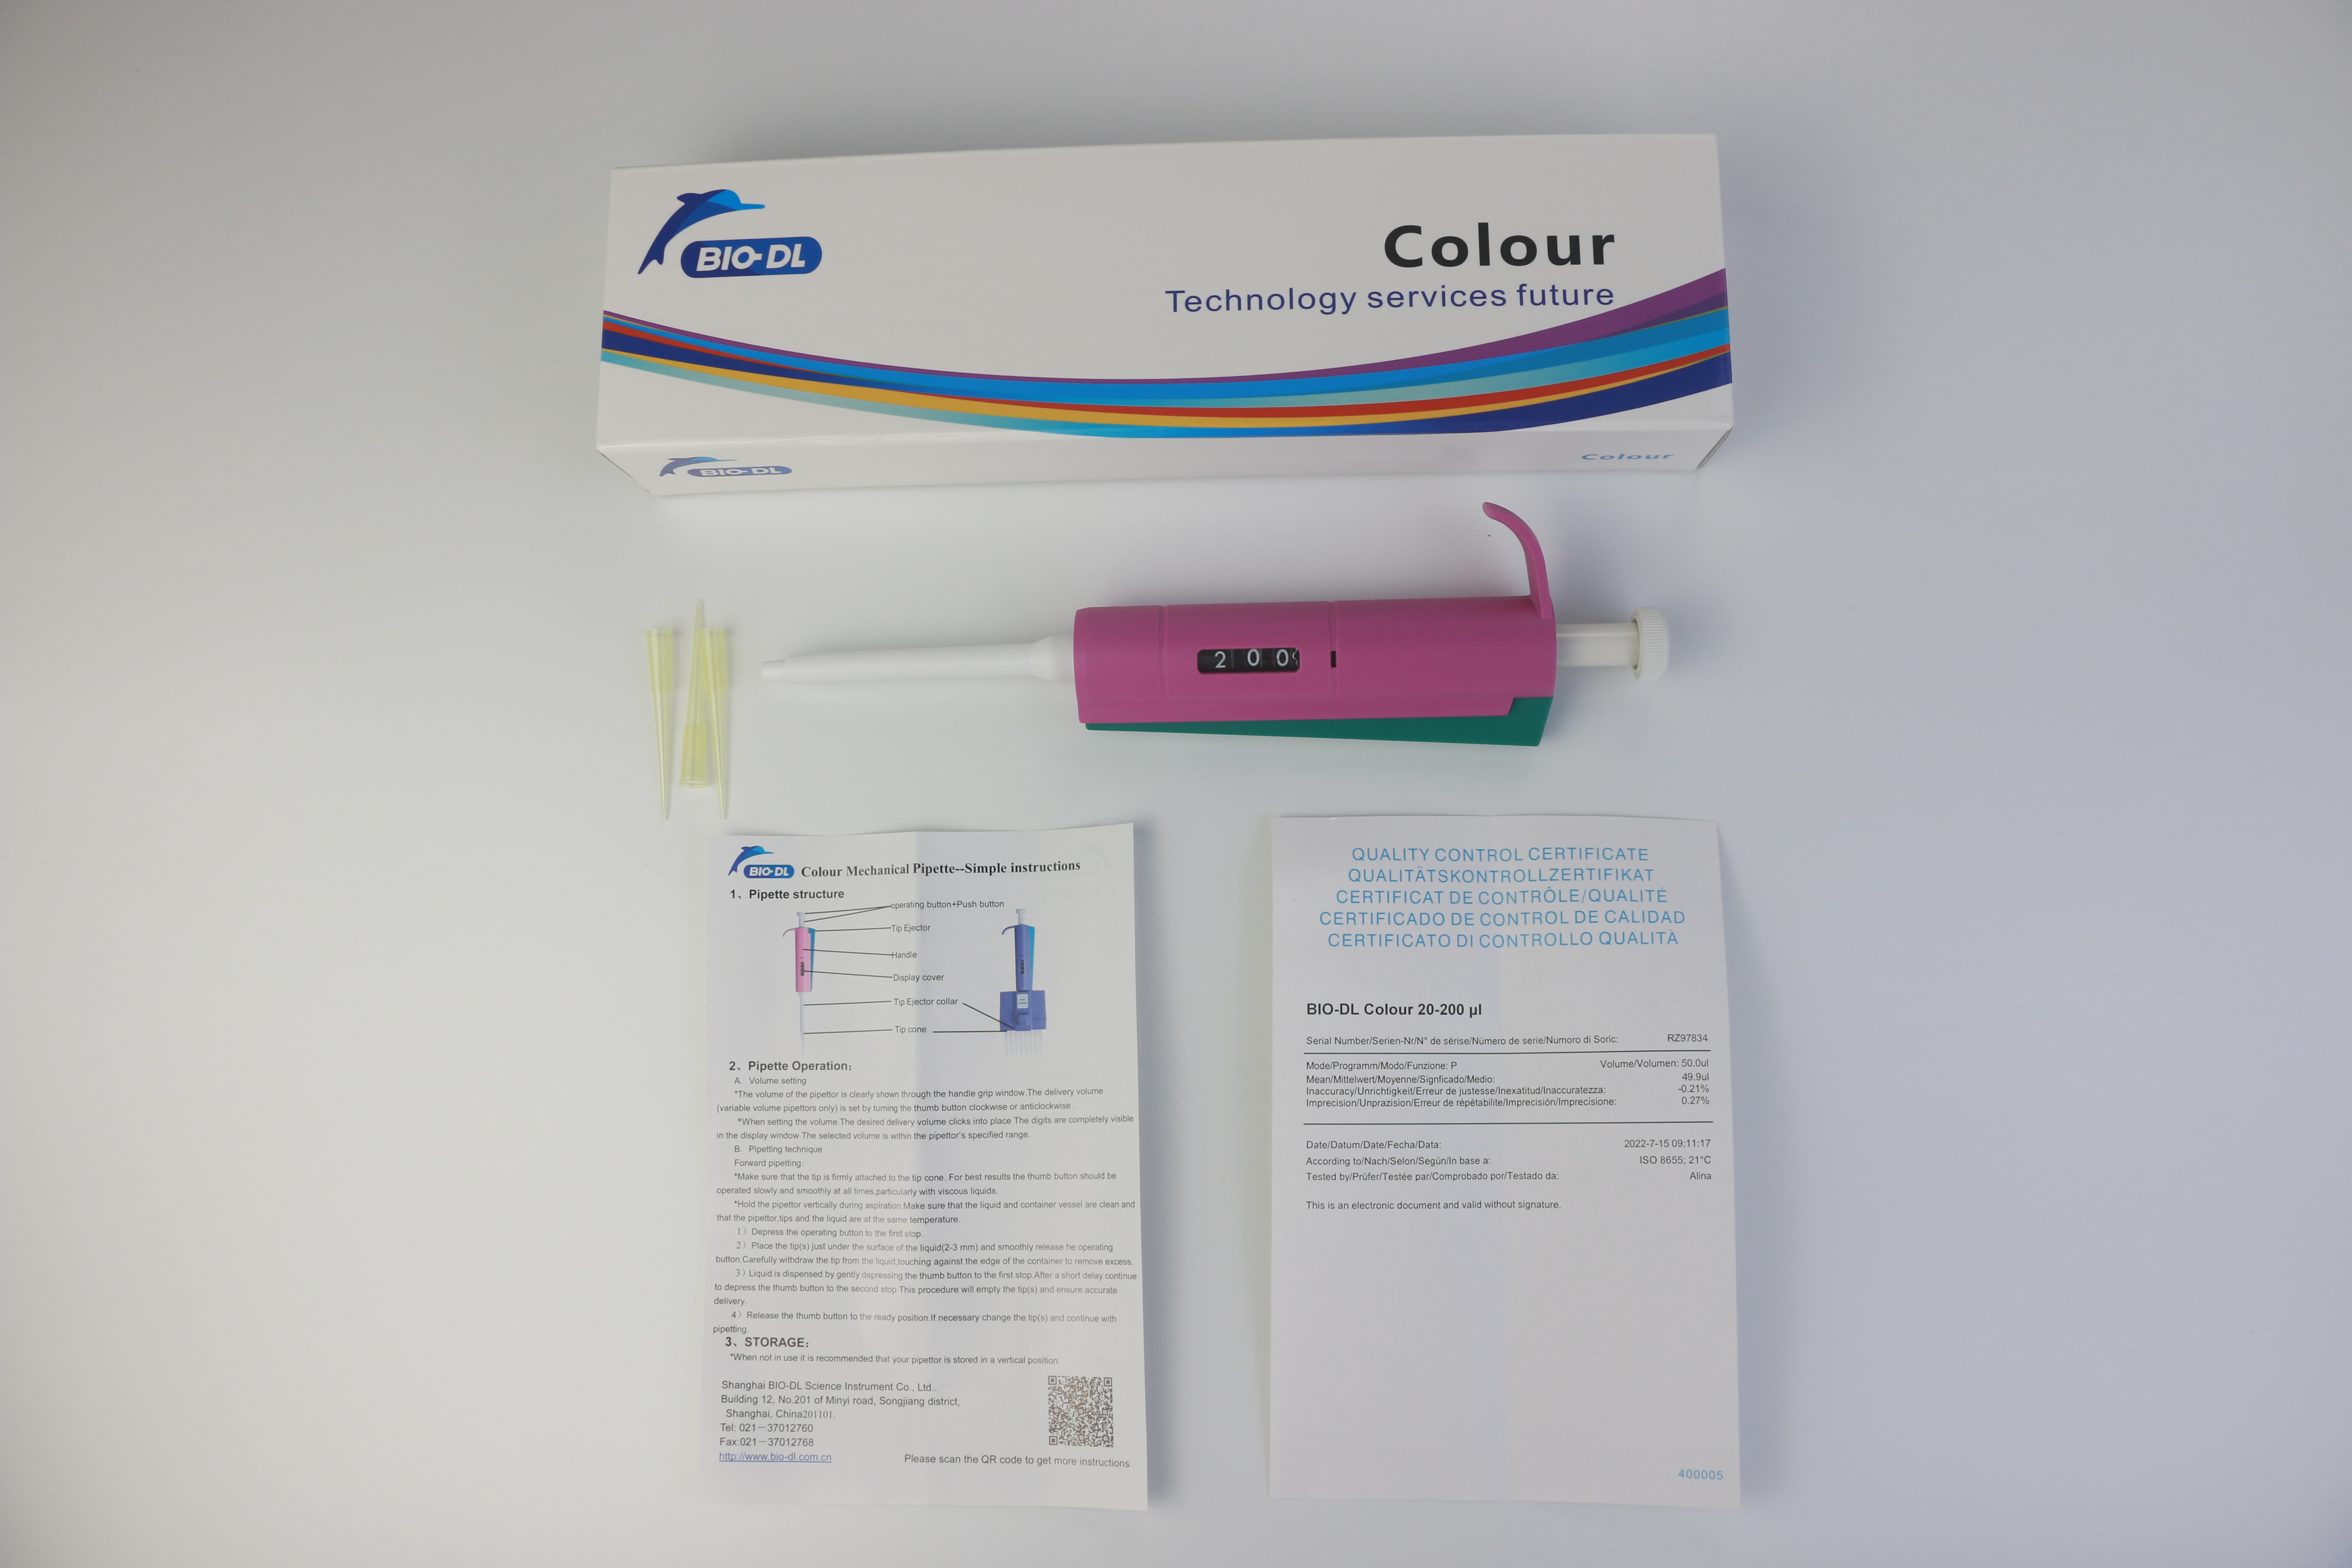 200ul Heat-resisting Hospital Colour Pipette